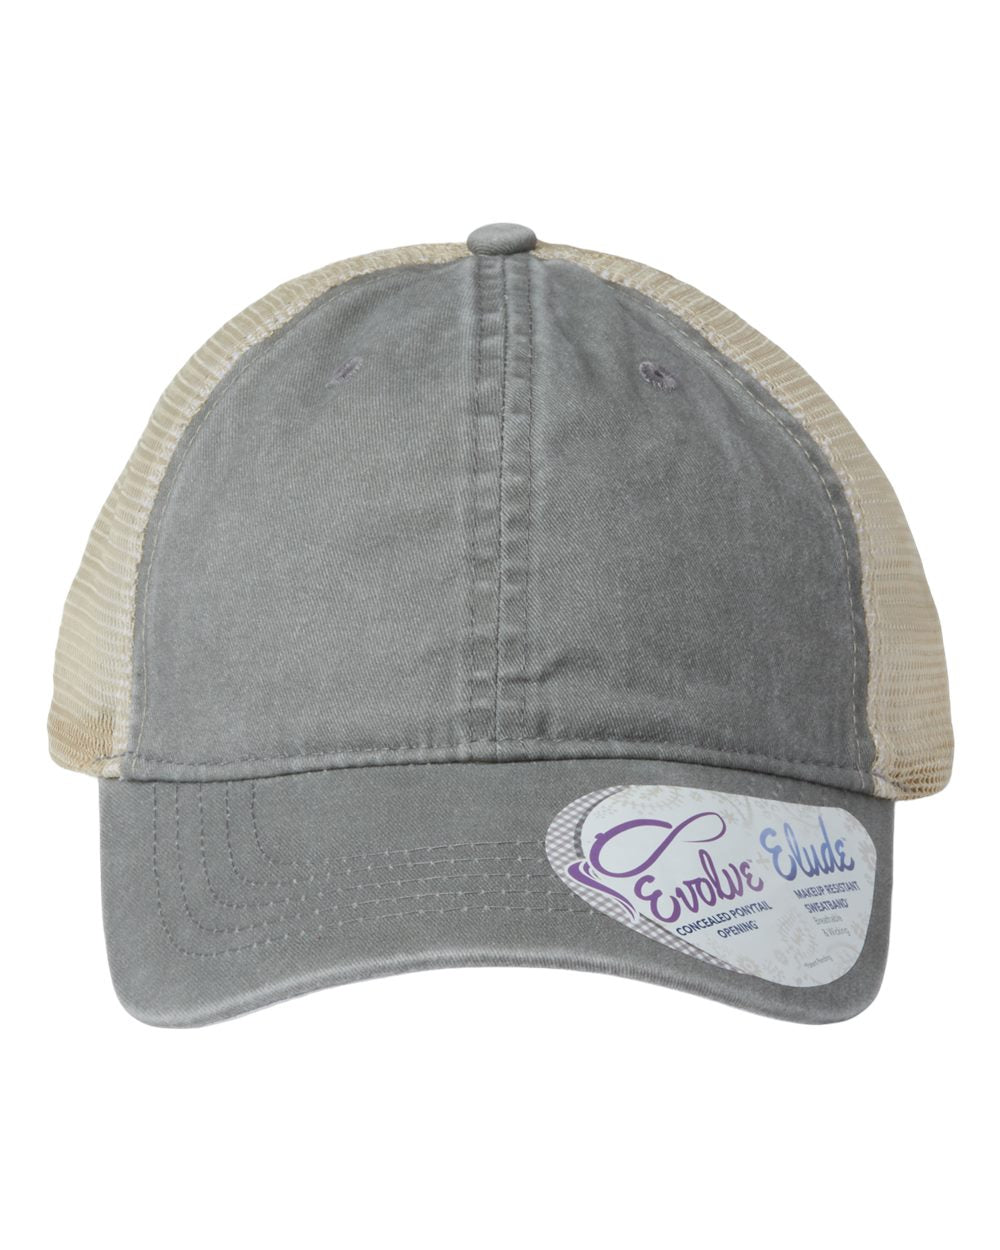 A women's washed mesh-back cap in light grey with polka dot pattern on the front panel.